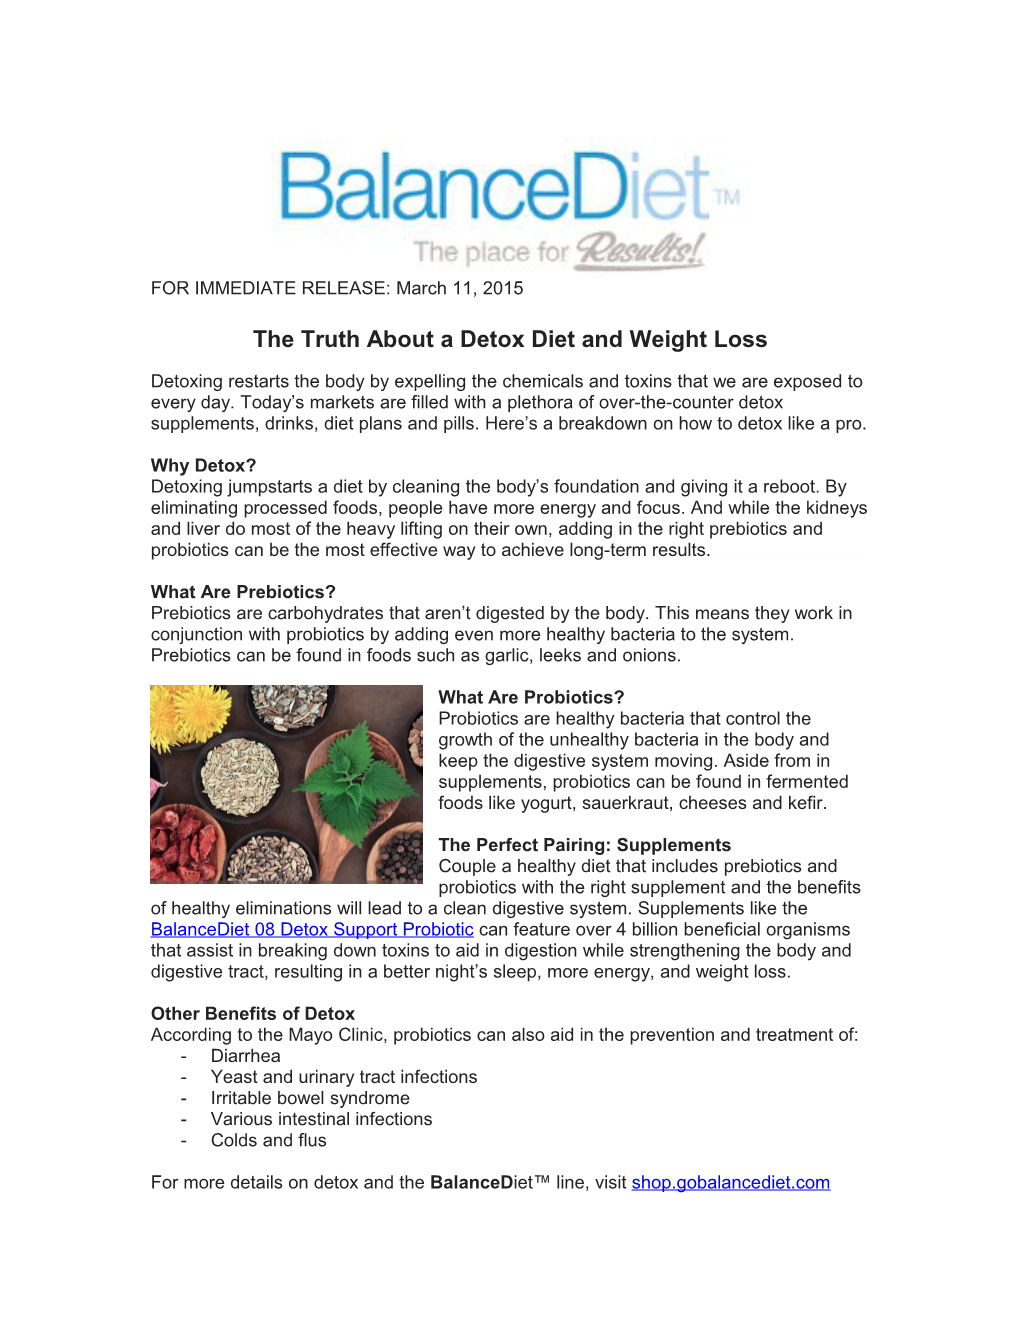 The Truth About a Detox Diet and Weight Loss